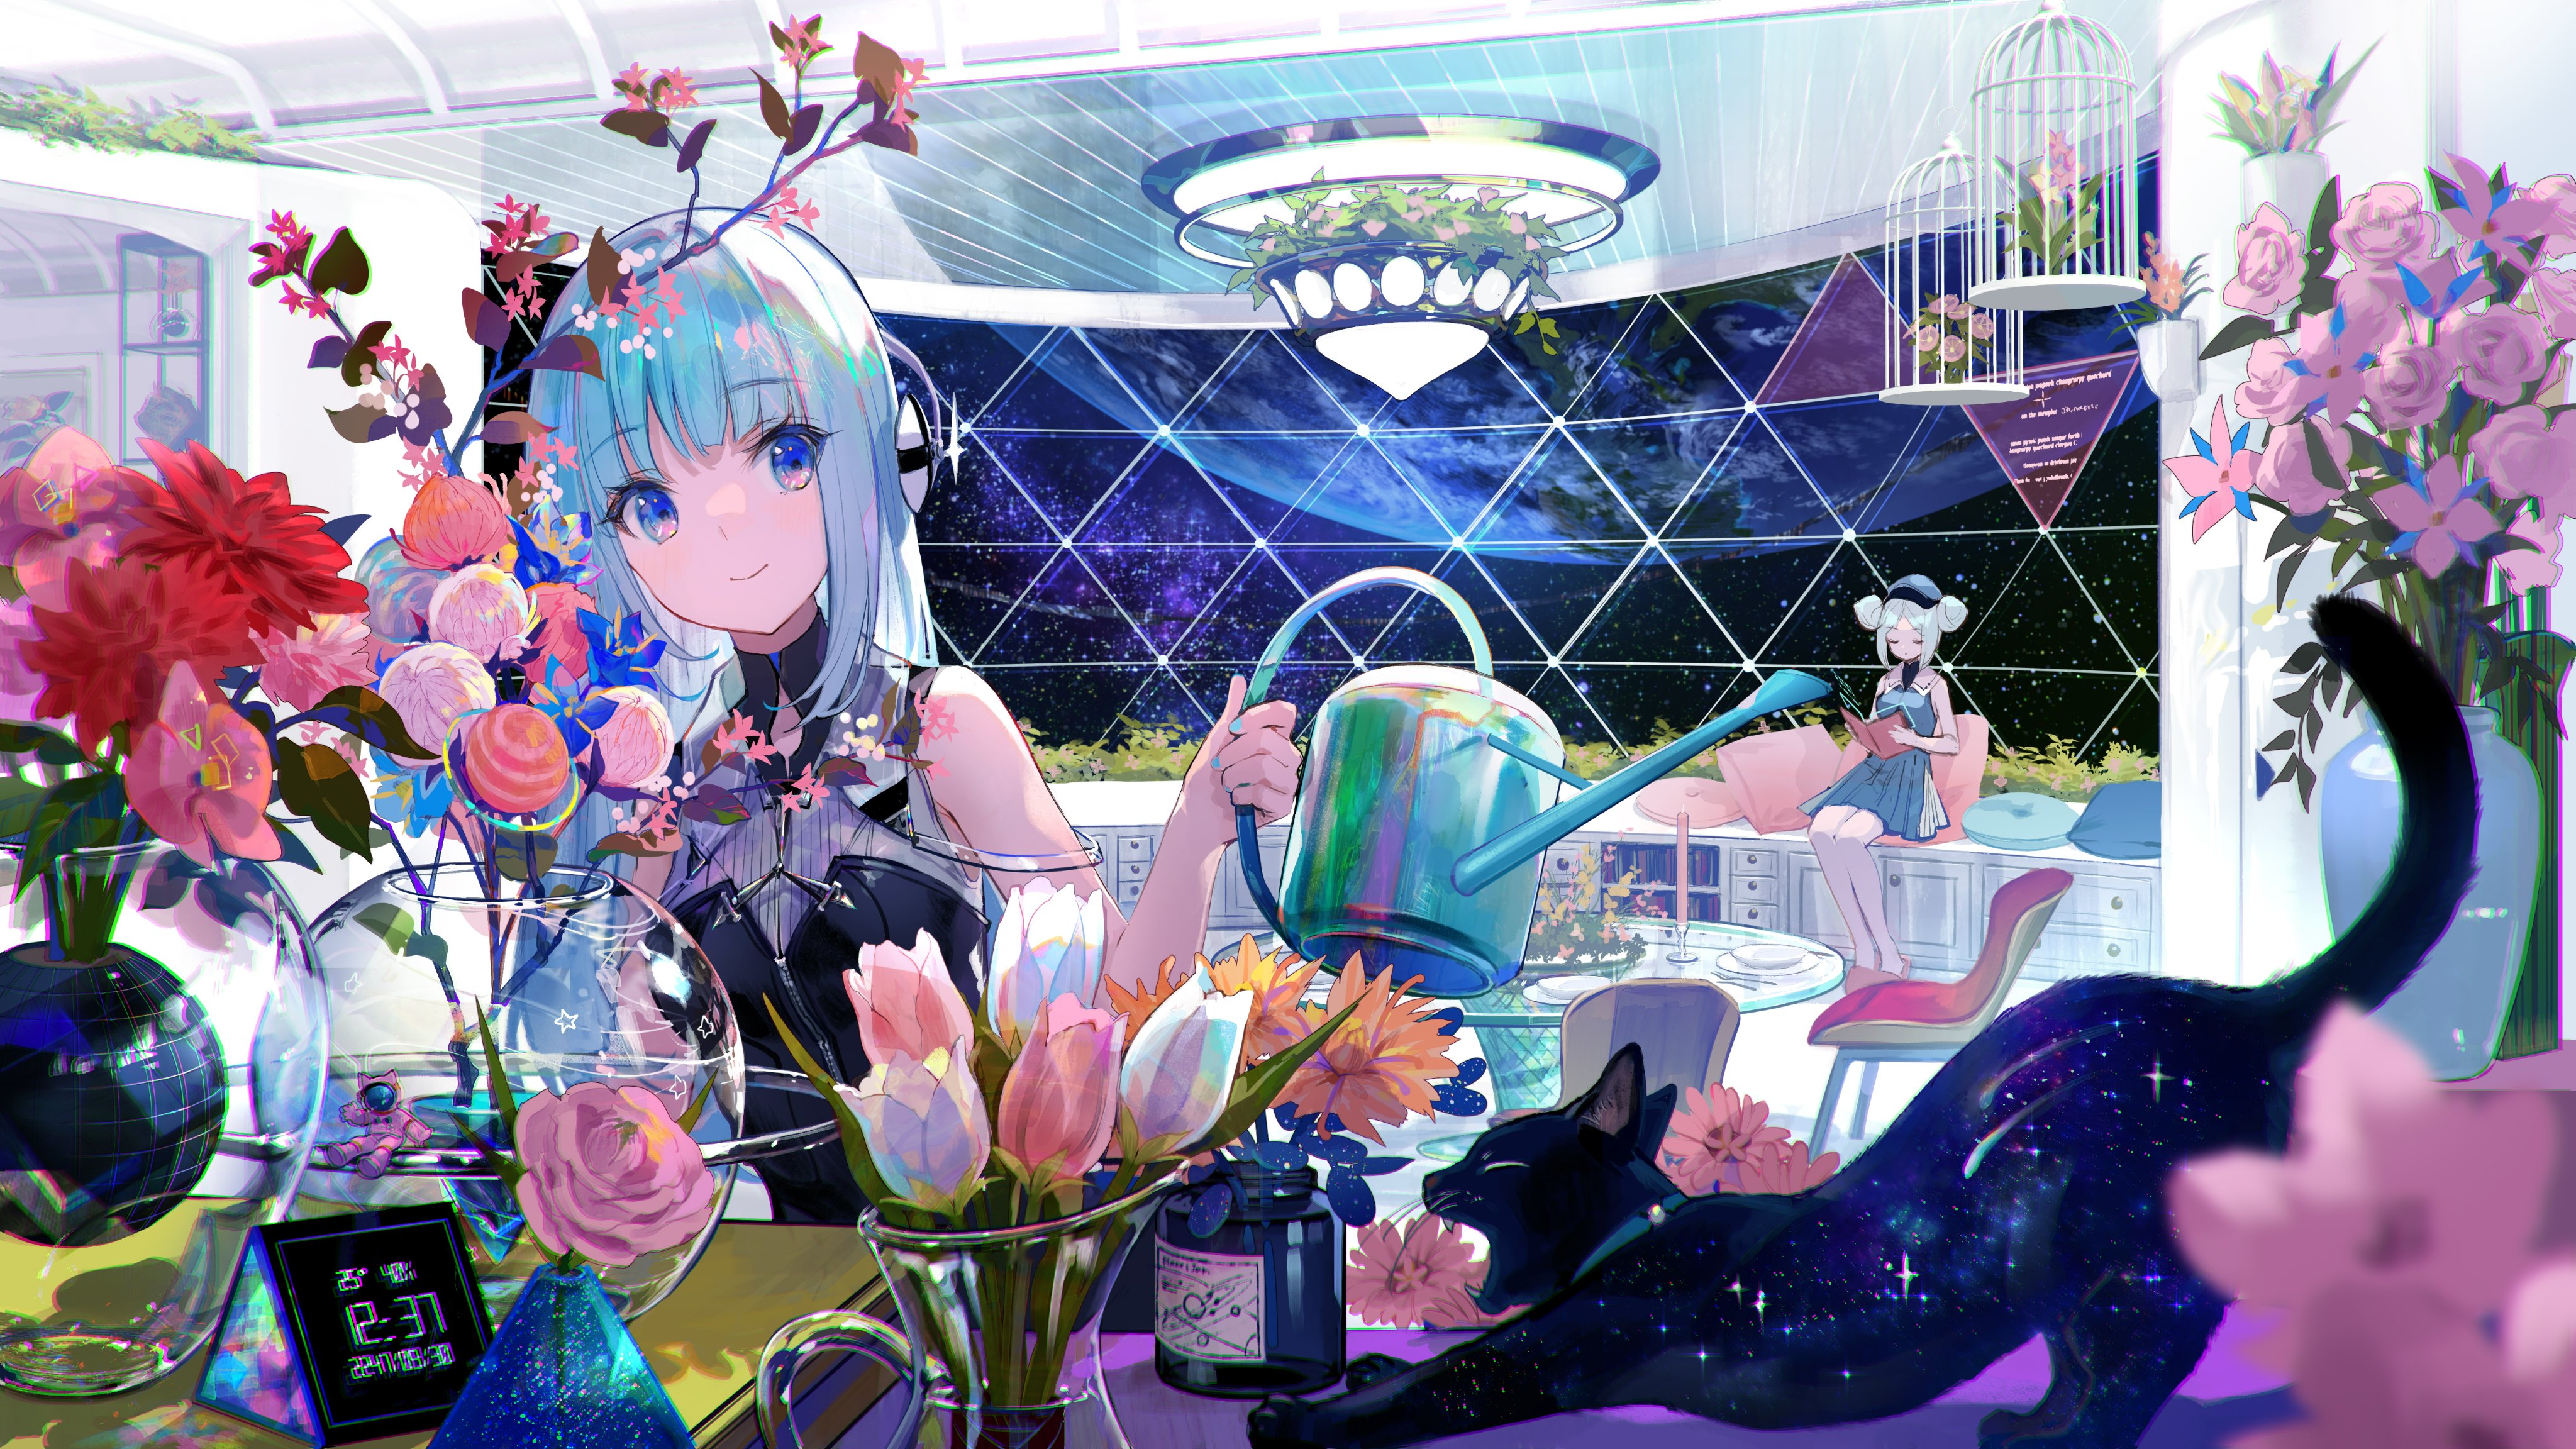 Anime 4096x2304 anime anime girls blue hair blue eyes space cats flowers long hair smiling planet stars vases cages chair indoors women indoors